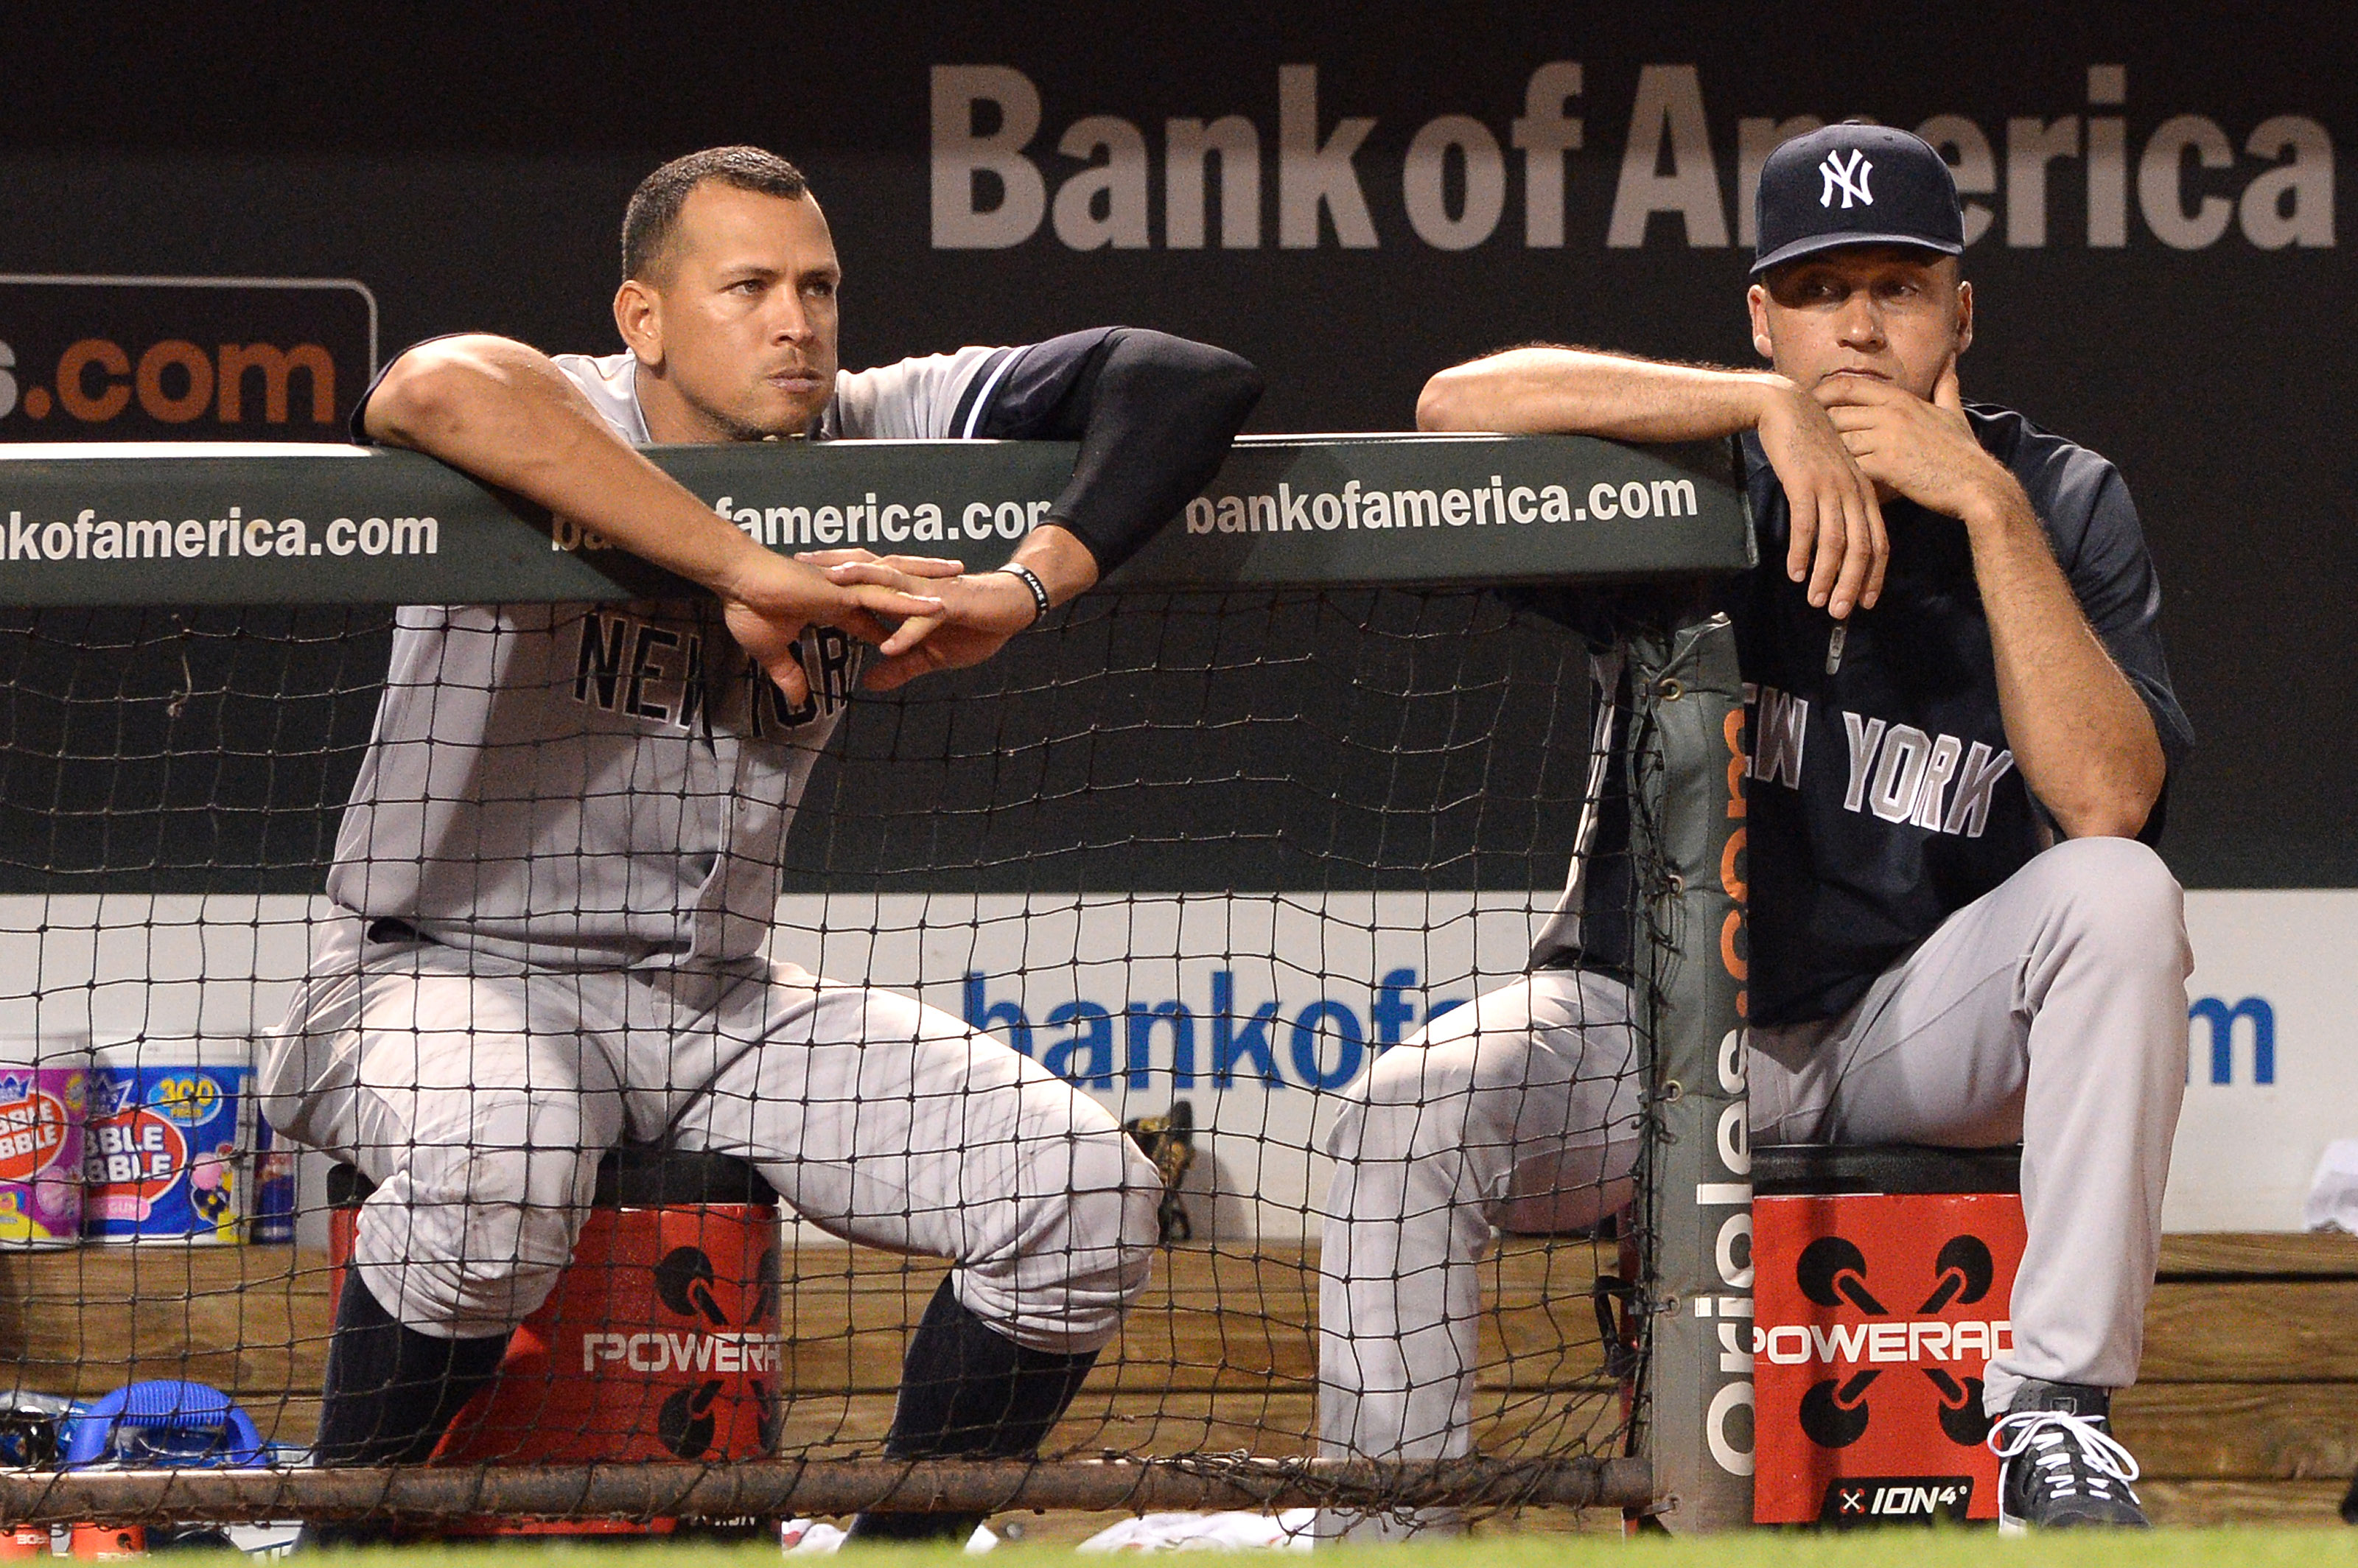 Derek Jeter says Yankees have to move on without Alex Rodriguez